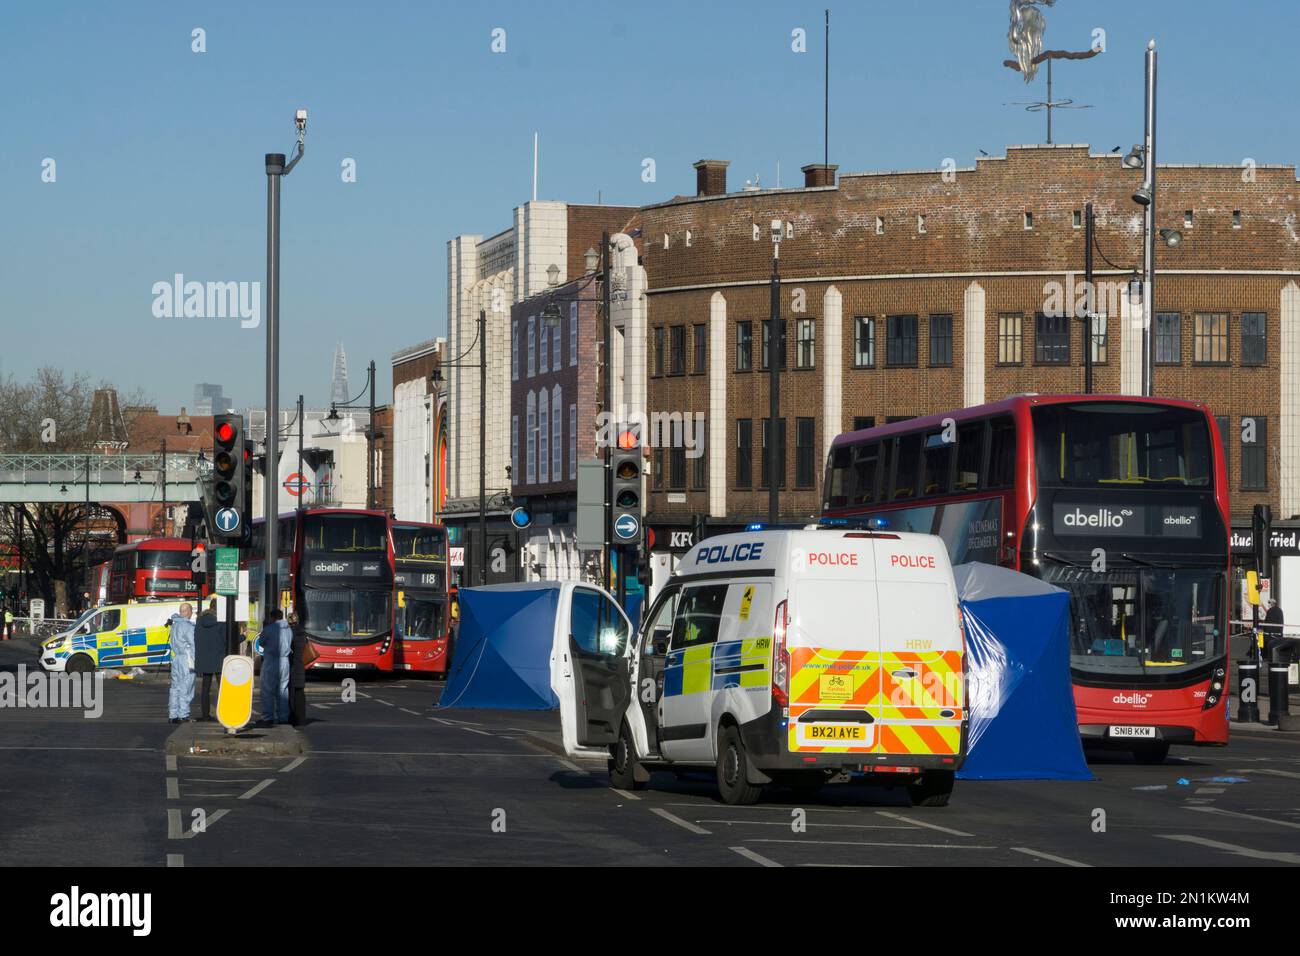 London, UK, 6 February 2022: Brixton centre is closed to traffic after a pedestrian fatality at the junction of Brixton Hill and Coldharbour Lane. An HGV lorry hit the man and did not stop but was later apprehended by police. Many bus routes are disrupted and a quiet, solemn air pervades the normally bustling Brixton Road. Police locally said the road closures were unlikely to be cleared before 6pm. Anna Watson/Alamy Live News Stock Photo